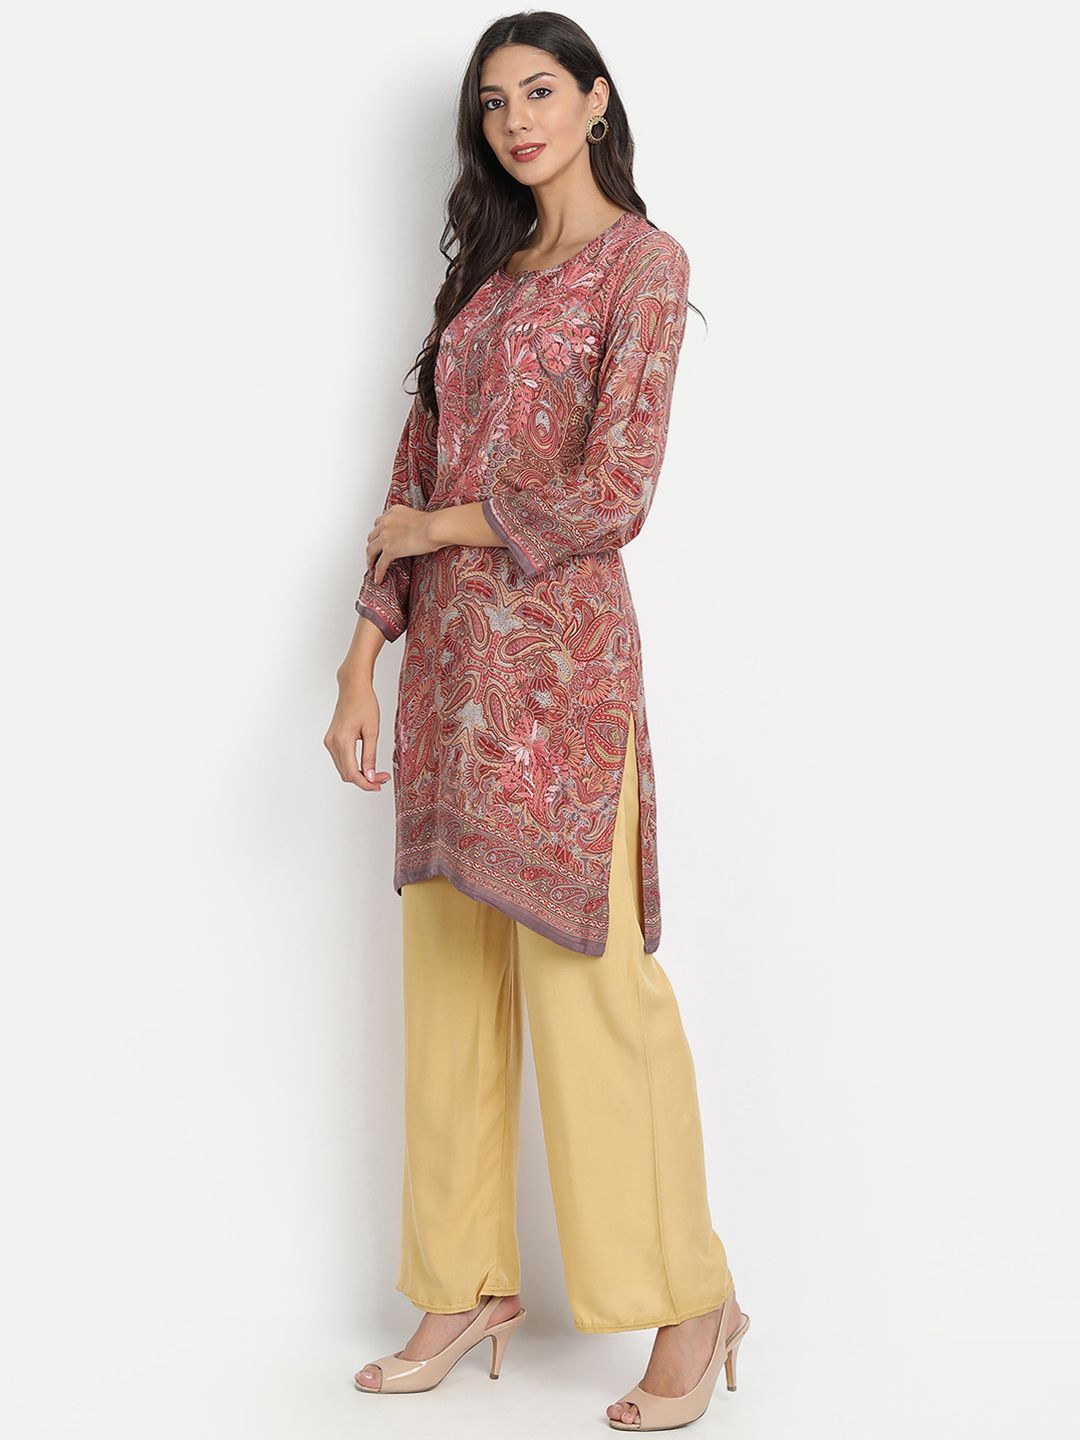 HOUSE OF KARI Peach-Coloured & Grey Printed Tunic With Embroidered Detail Price in India